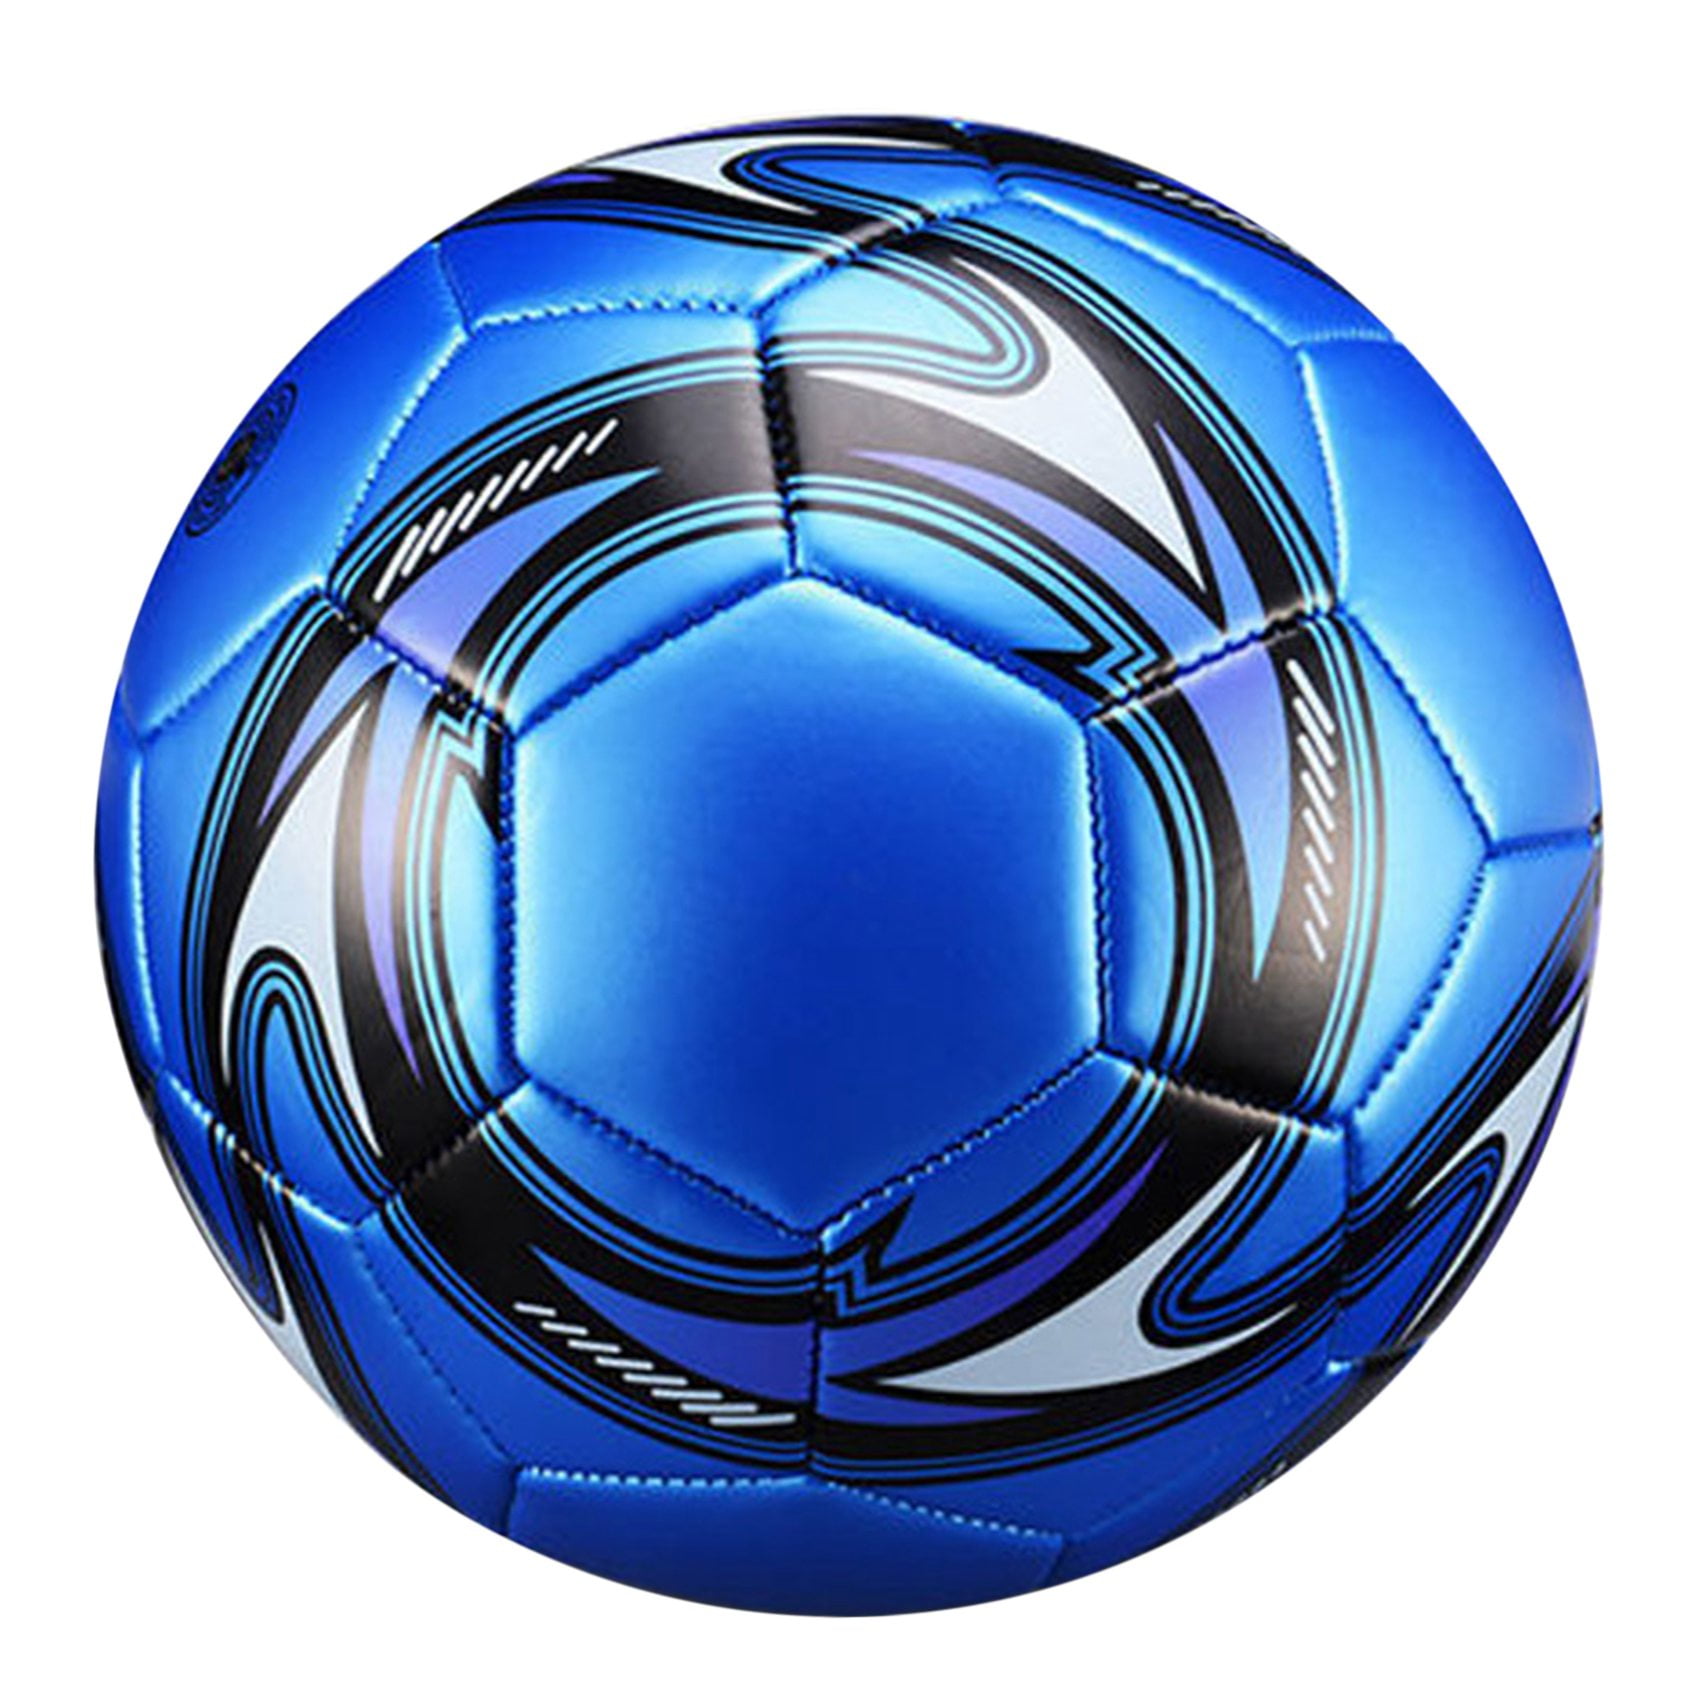 Professional Size 5 Pu Soccer Ball For Adults And Kids - Perfect For  Outdoor Competition, Training, And Entertainment - Temu